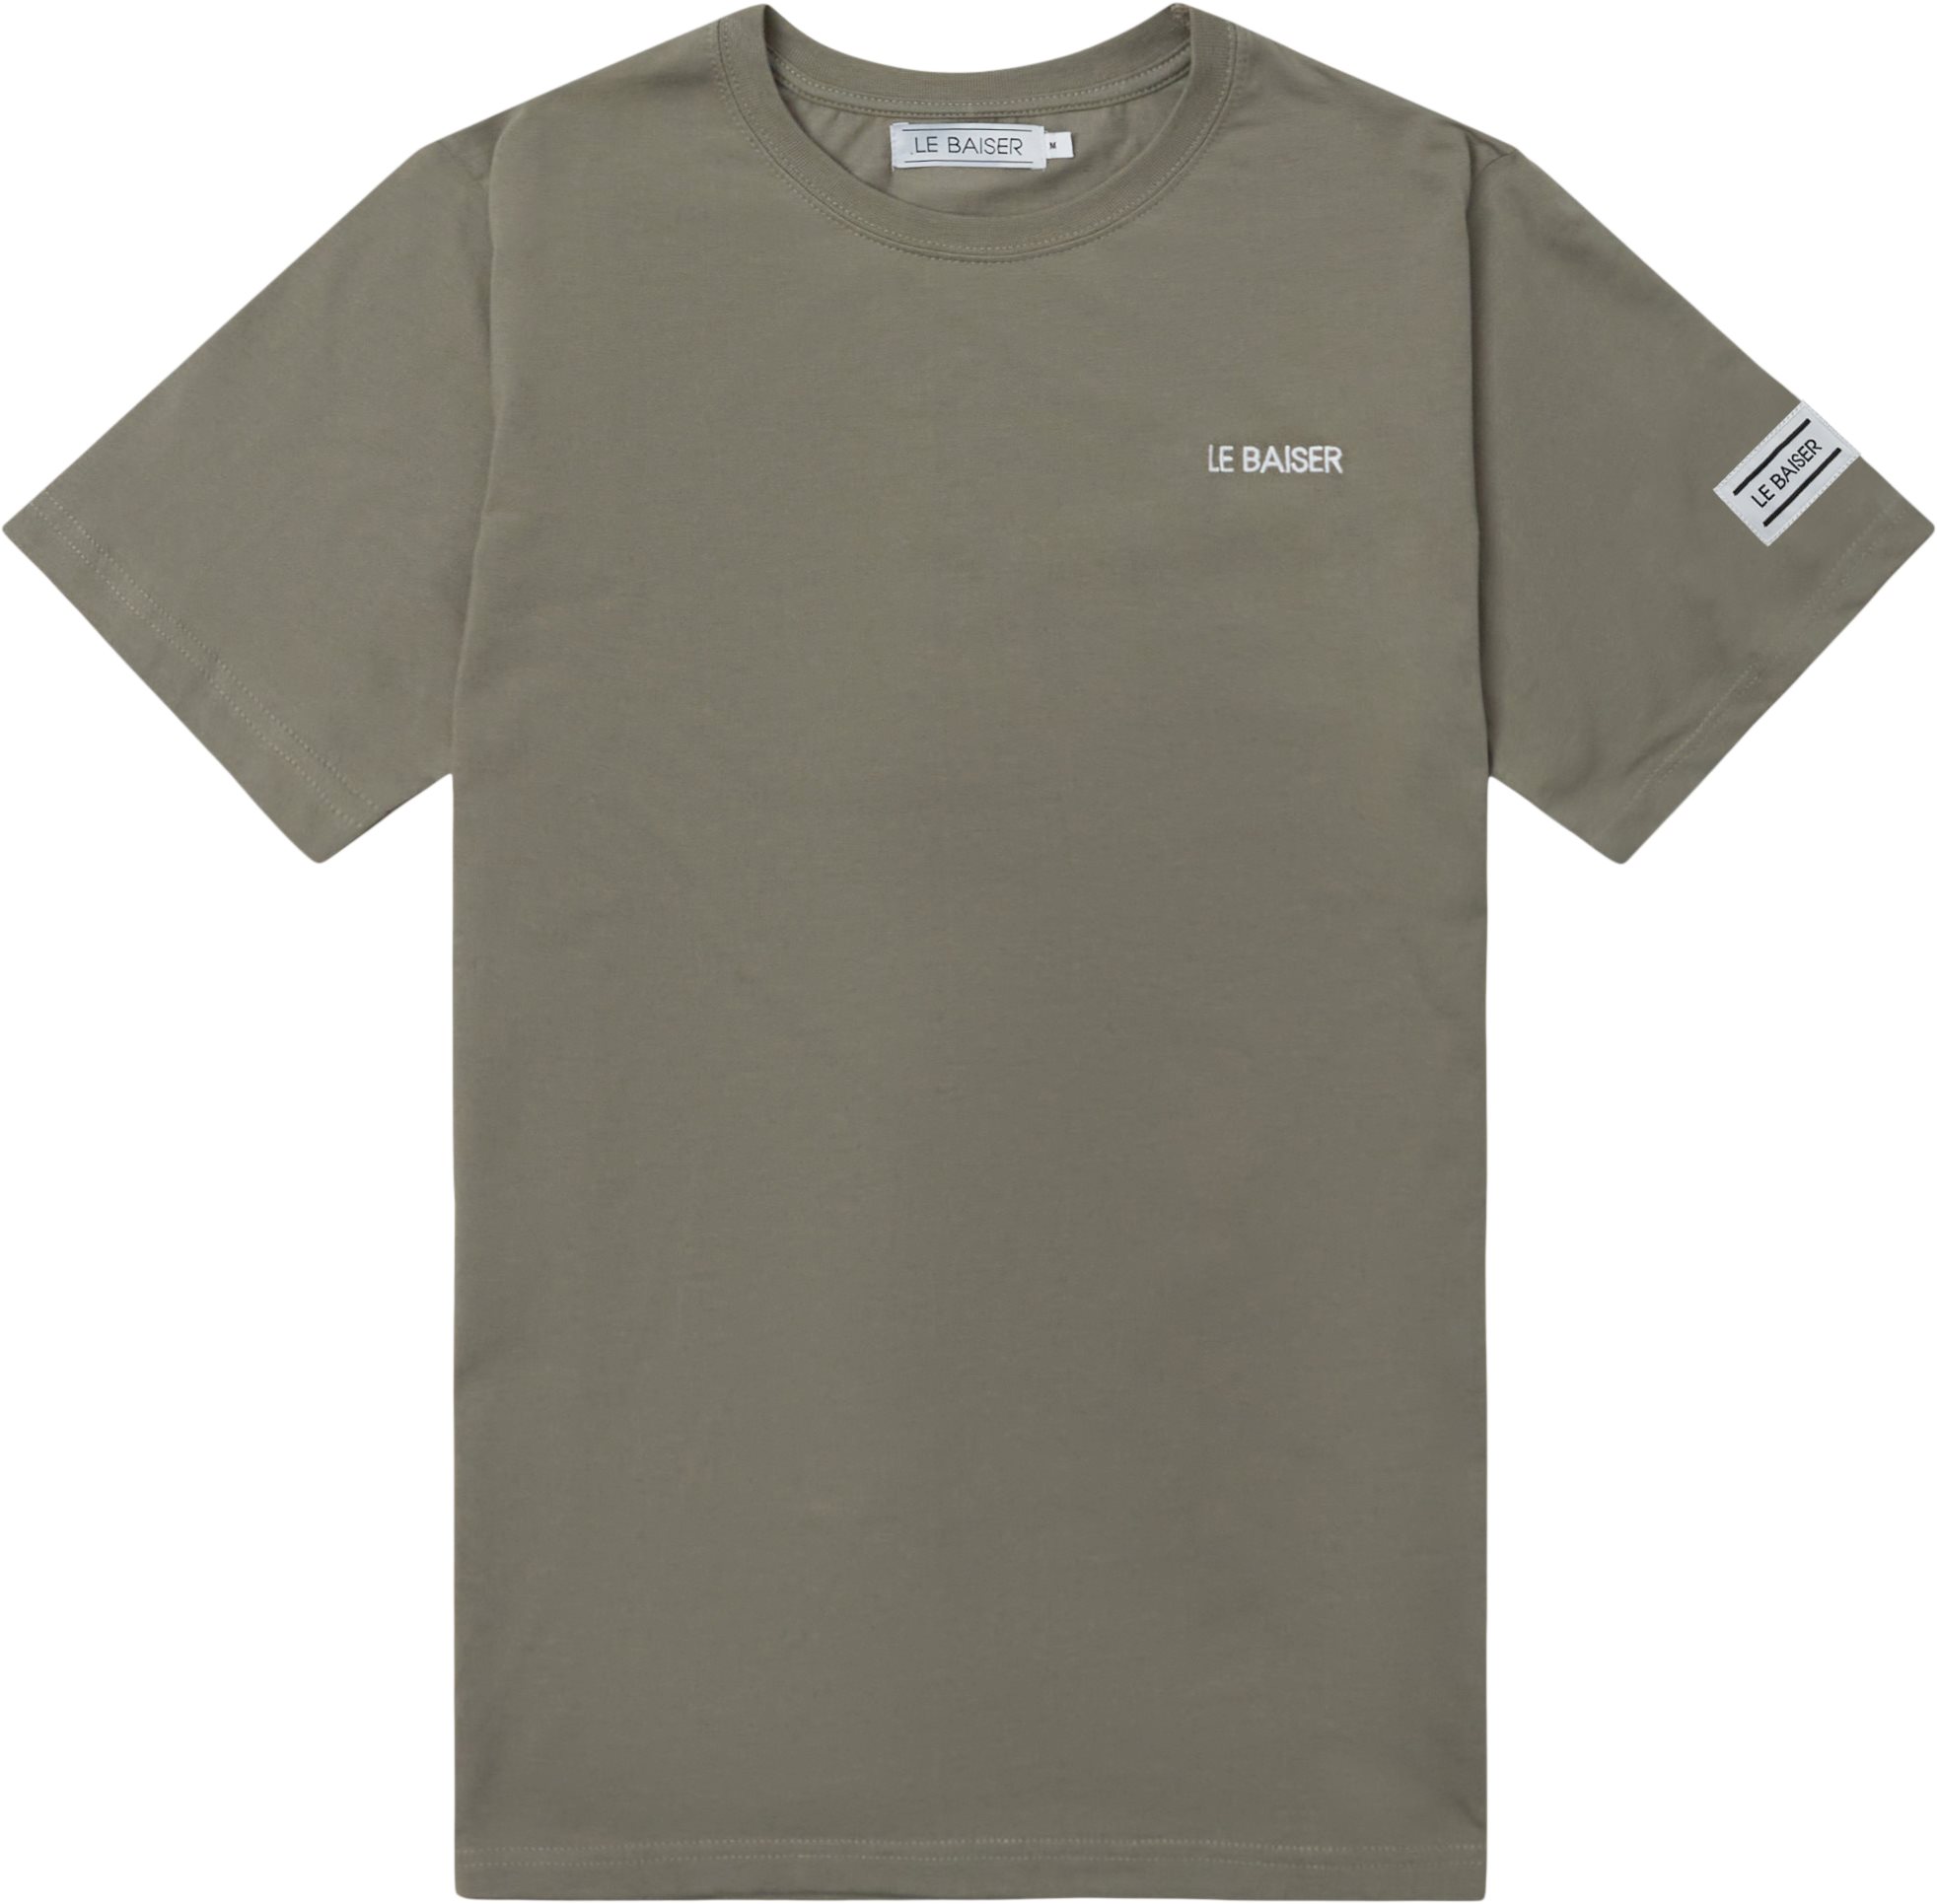 Bourg Tee - T-shirts - Regular fit - Army